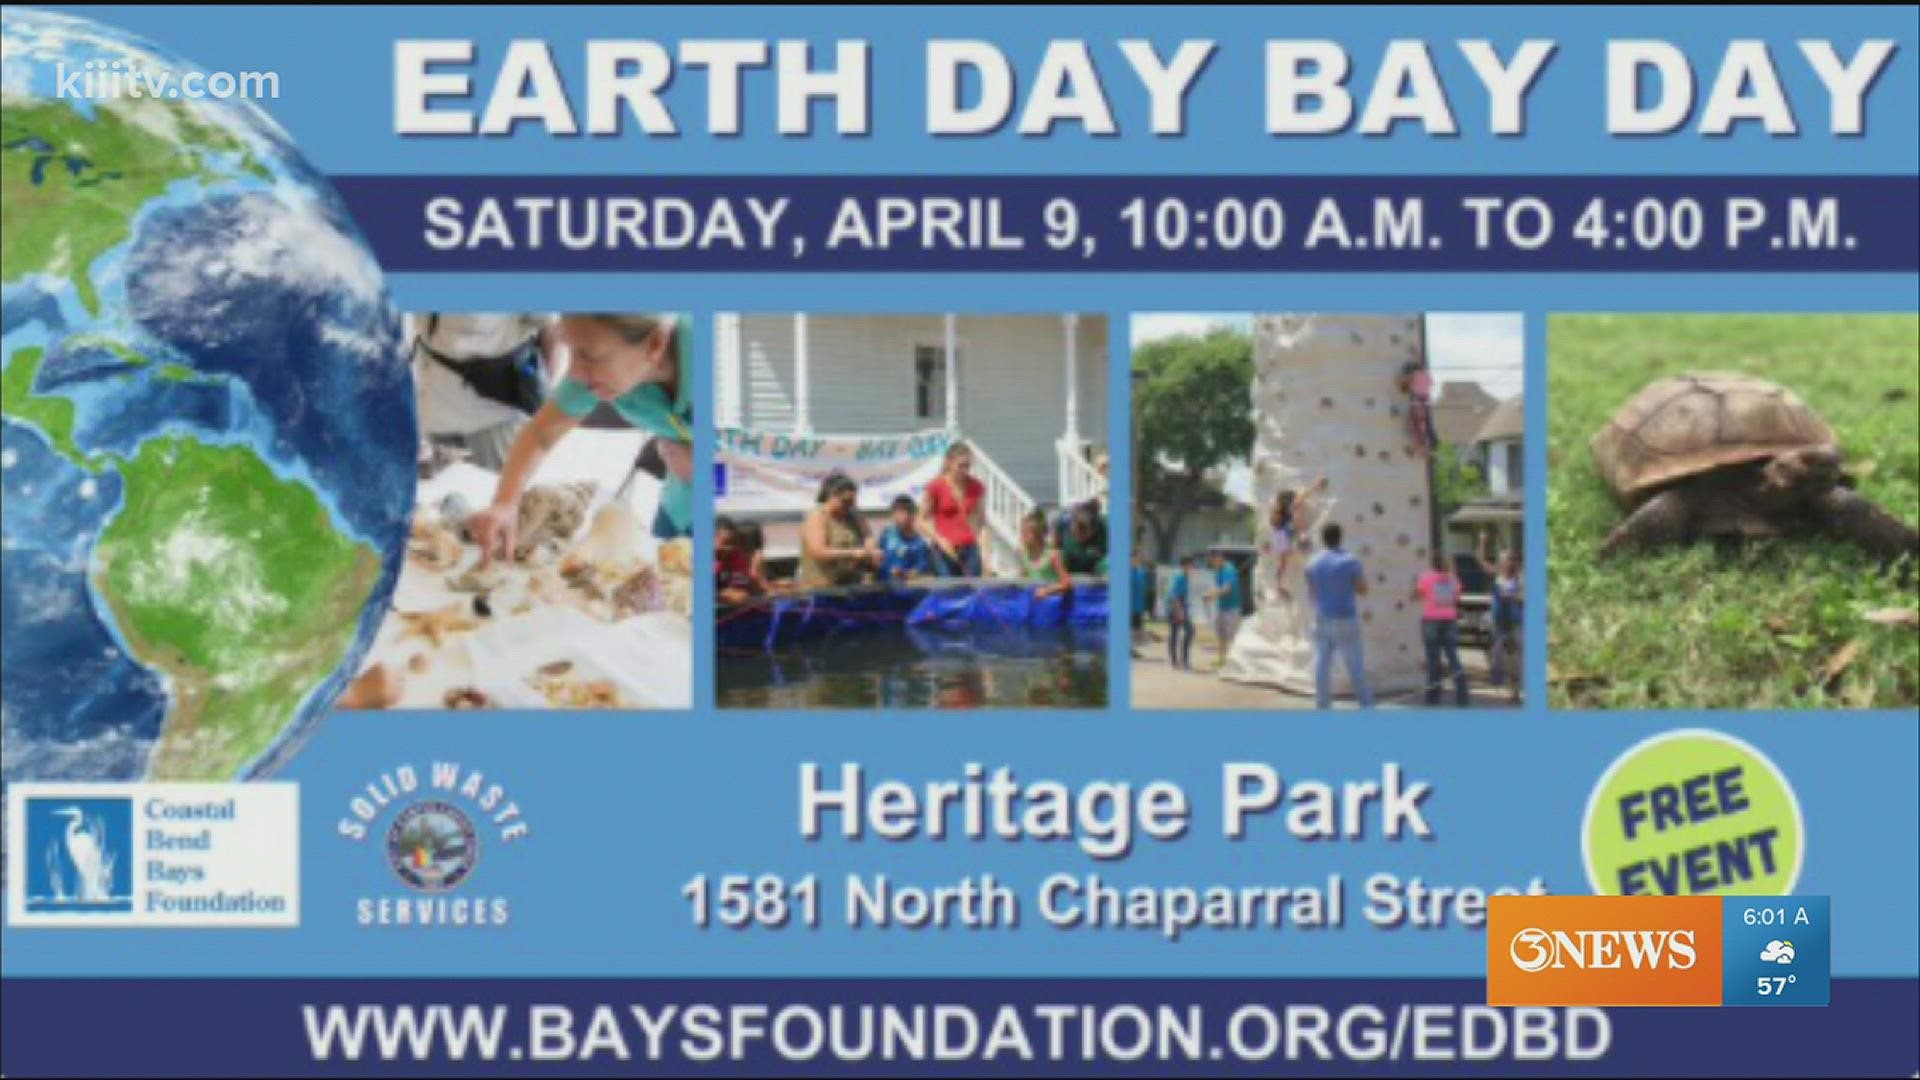 The Coastal Bend Bays Foundation event is happening at Heritage Park from 10 to 4.